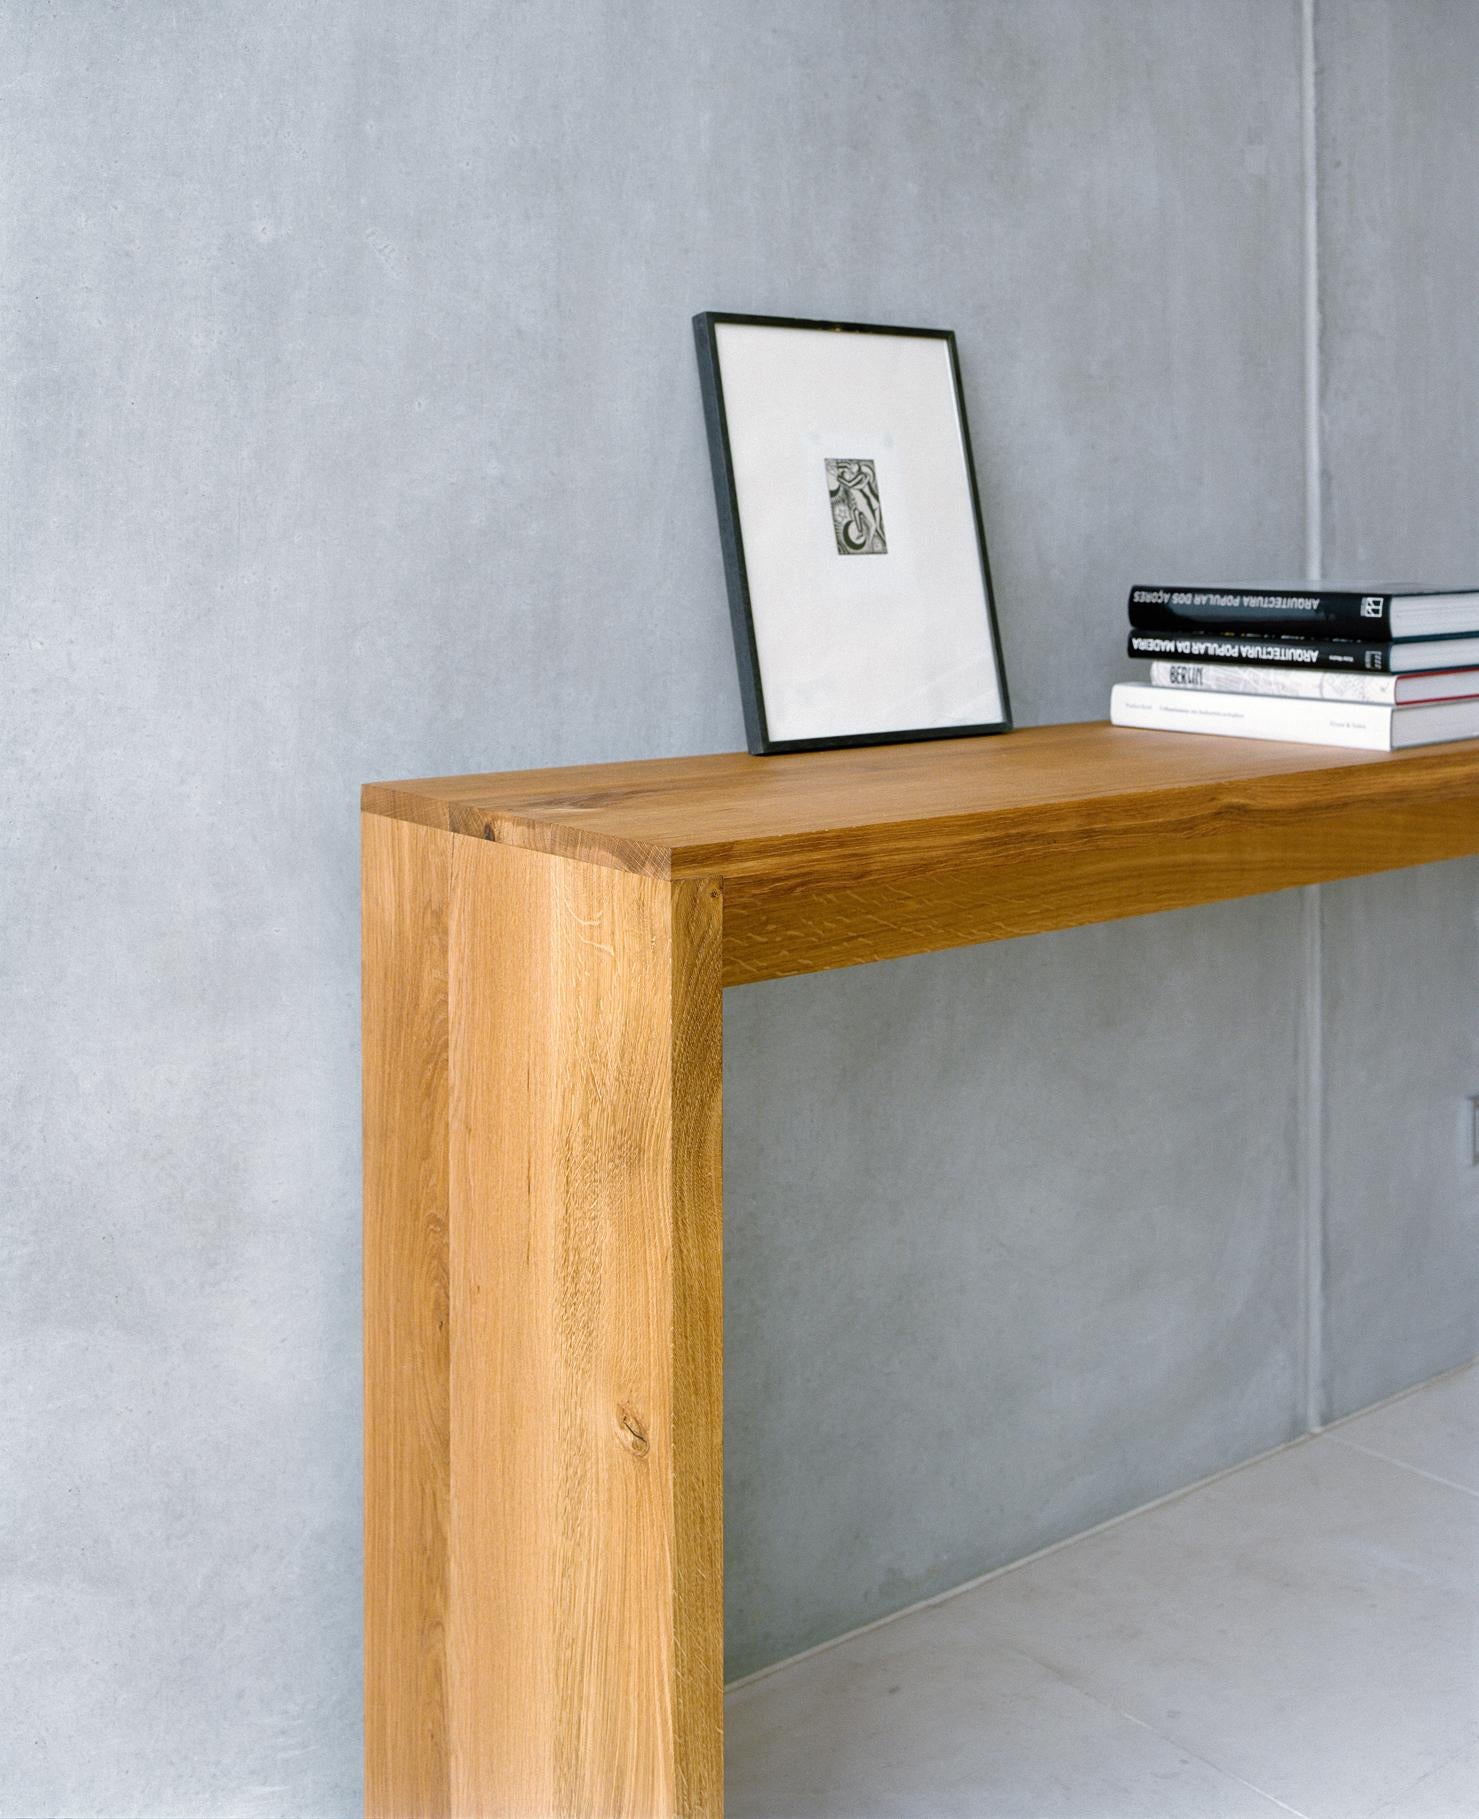 With its clear design language and pure materiality, sideboard Alto is perfectly suitable for both private and public interiors. The corner joints offer a distinctive e15 design detail, with the 40 MM (1 5/8 INCH) thick top milled to half of its